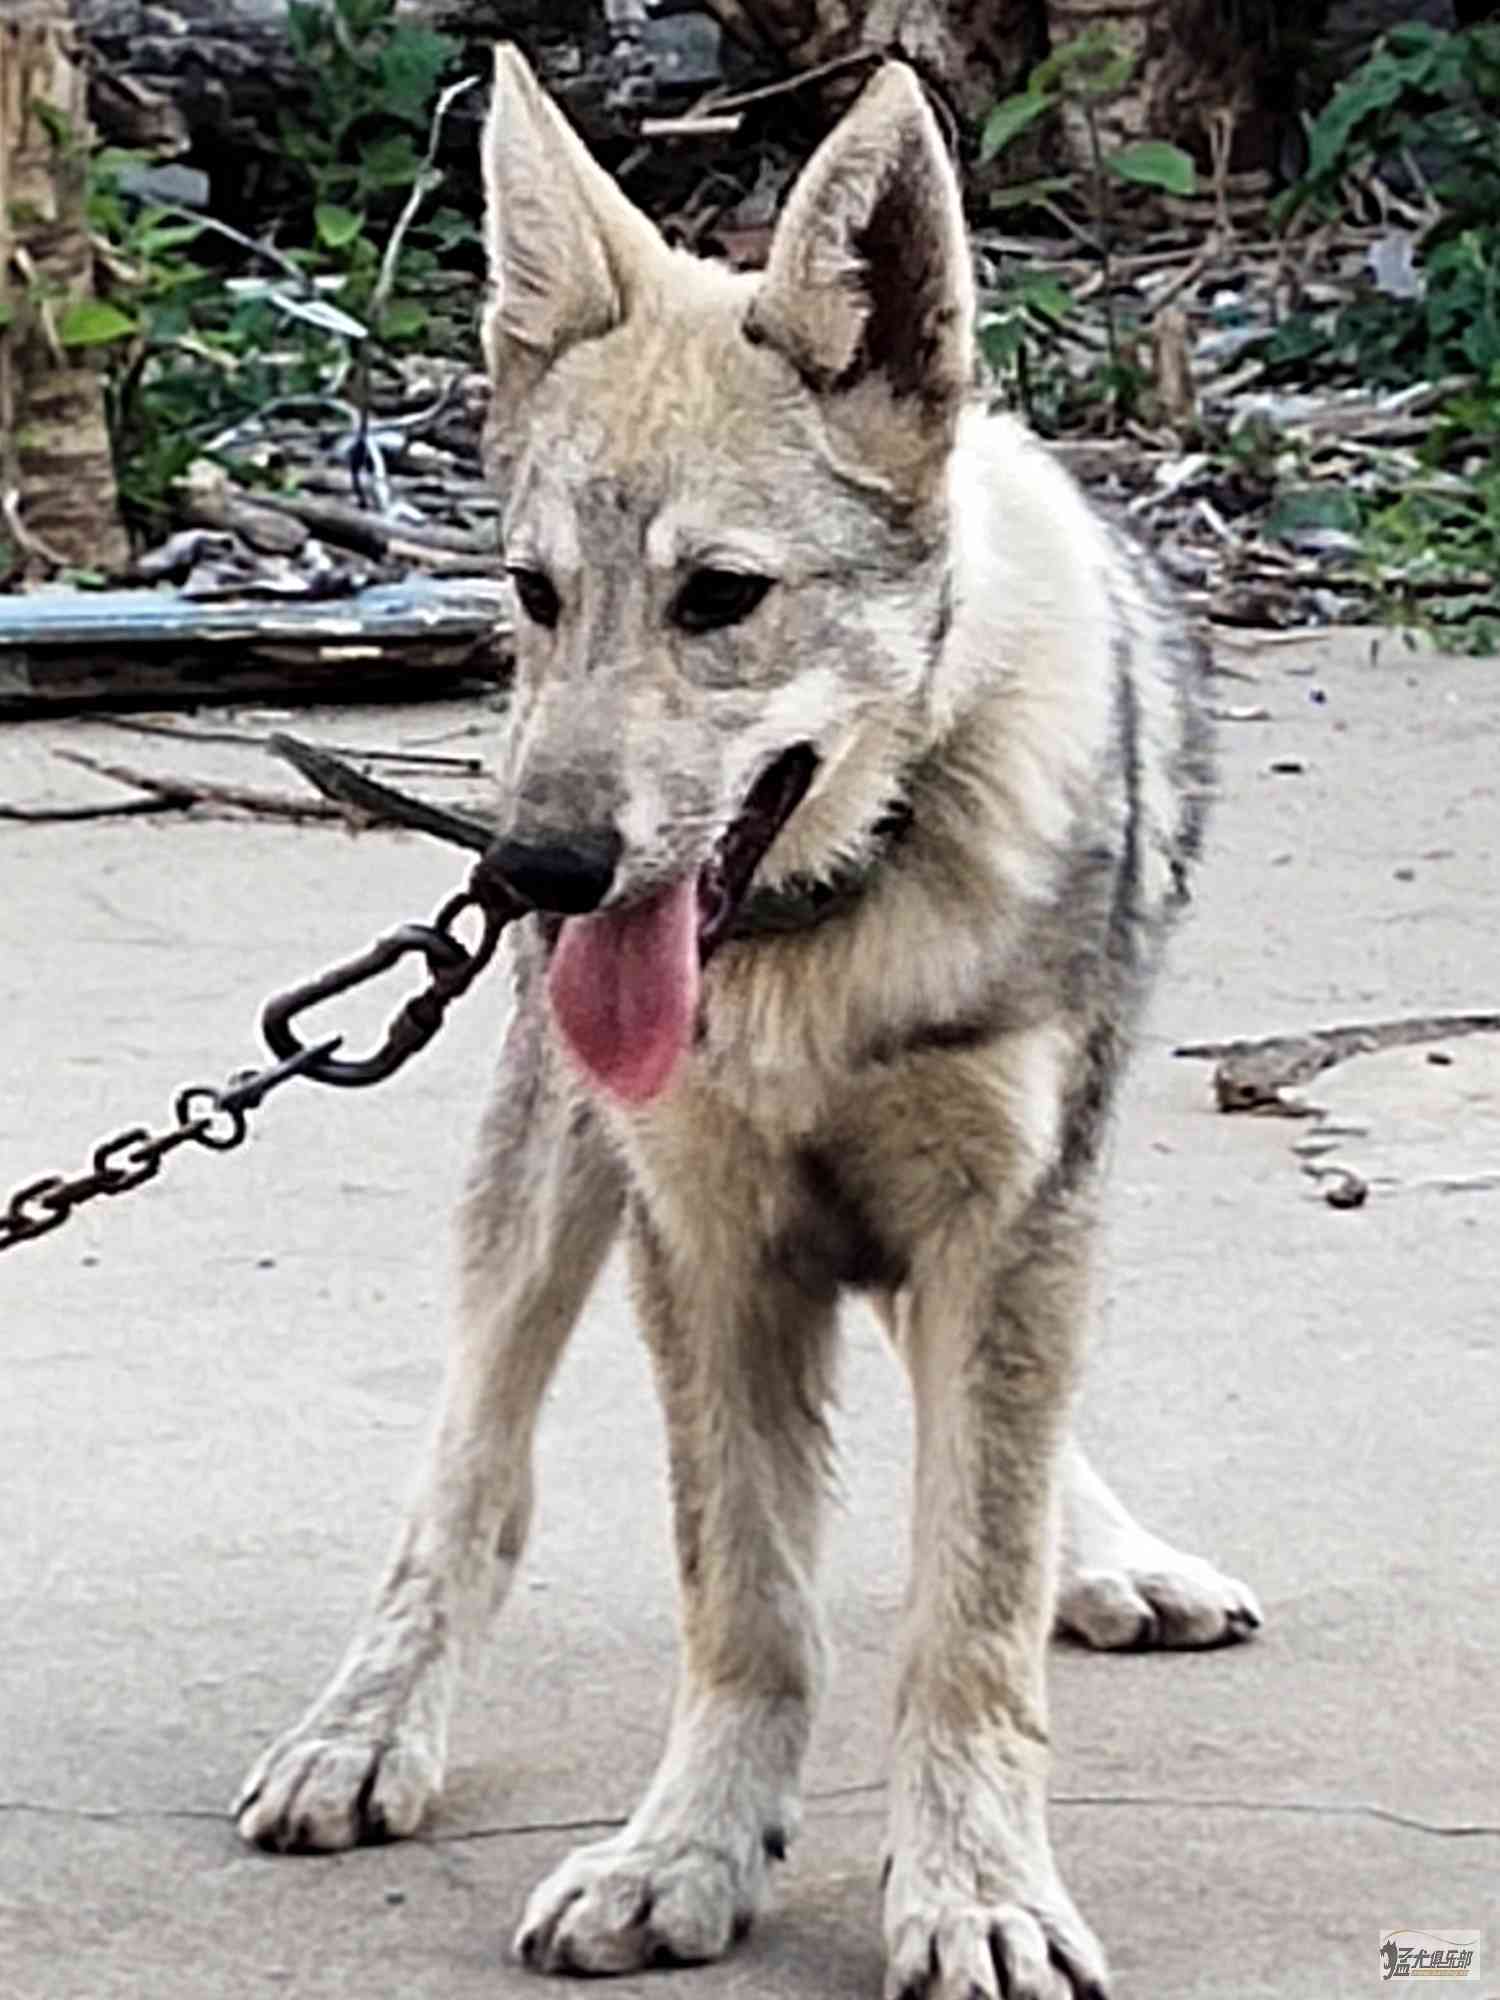 Czechoslovakian Wolfdog - A Real Wolf To Share Your Home?